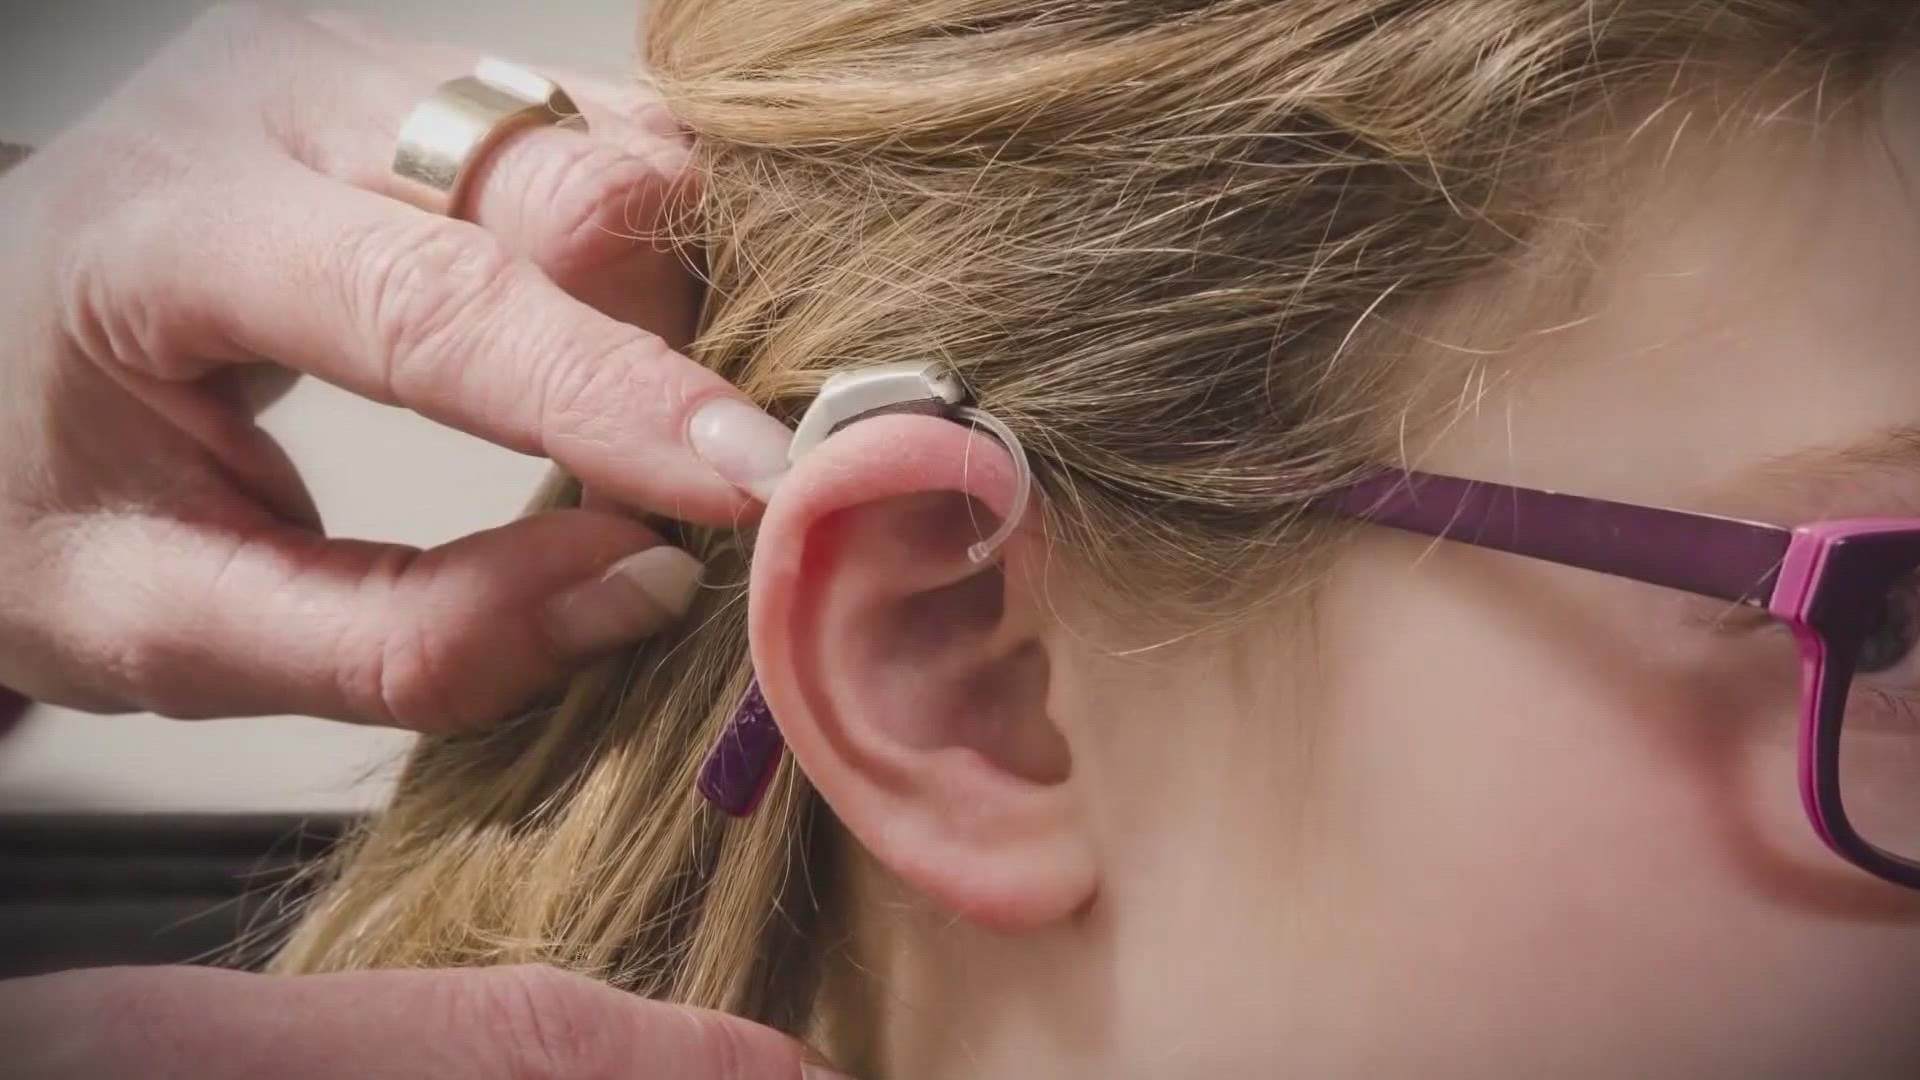 The FDA has cleared over the counter hearing aids, and many pharmacies like CVS offer these as an order ahead option for those with hearing loss.